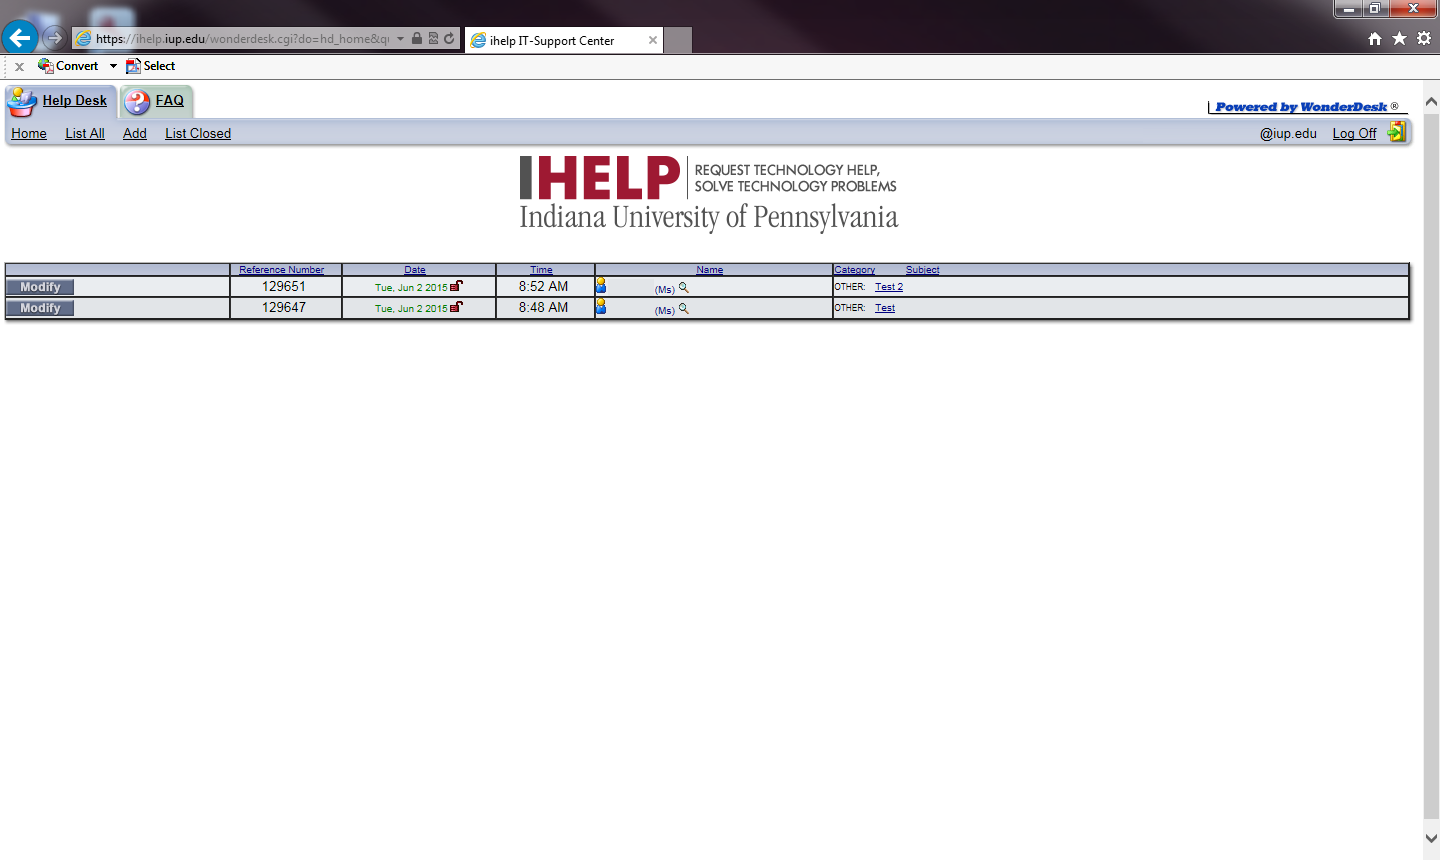 Display if you have multiple ihelp tickets open upon your login